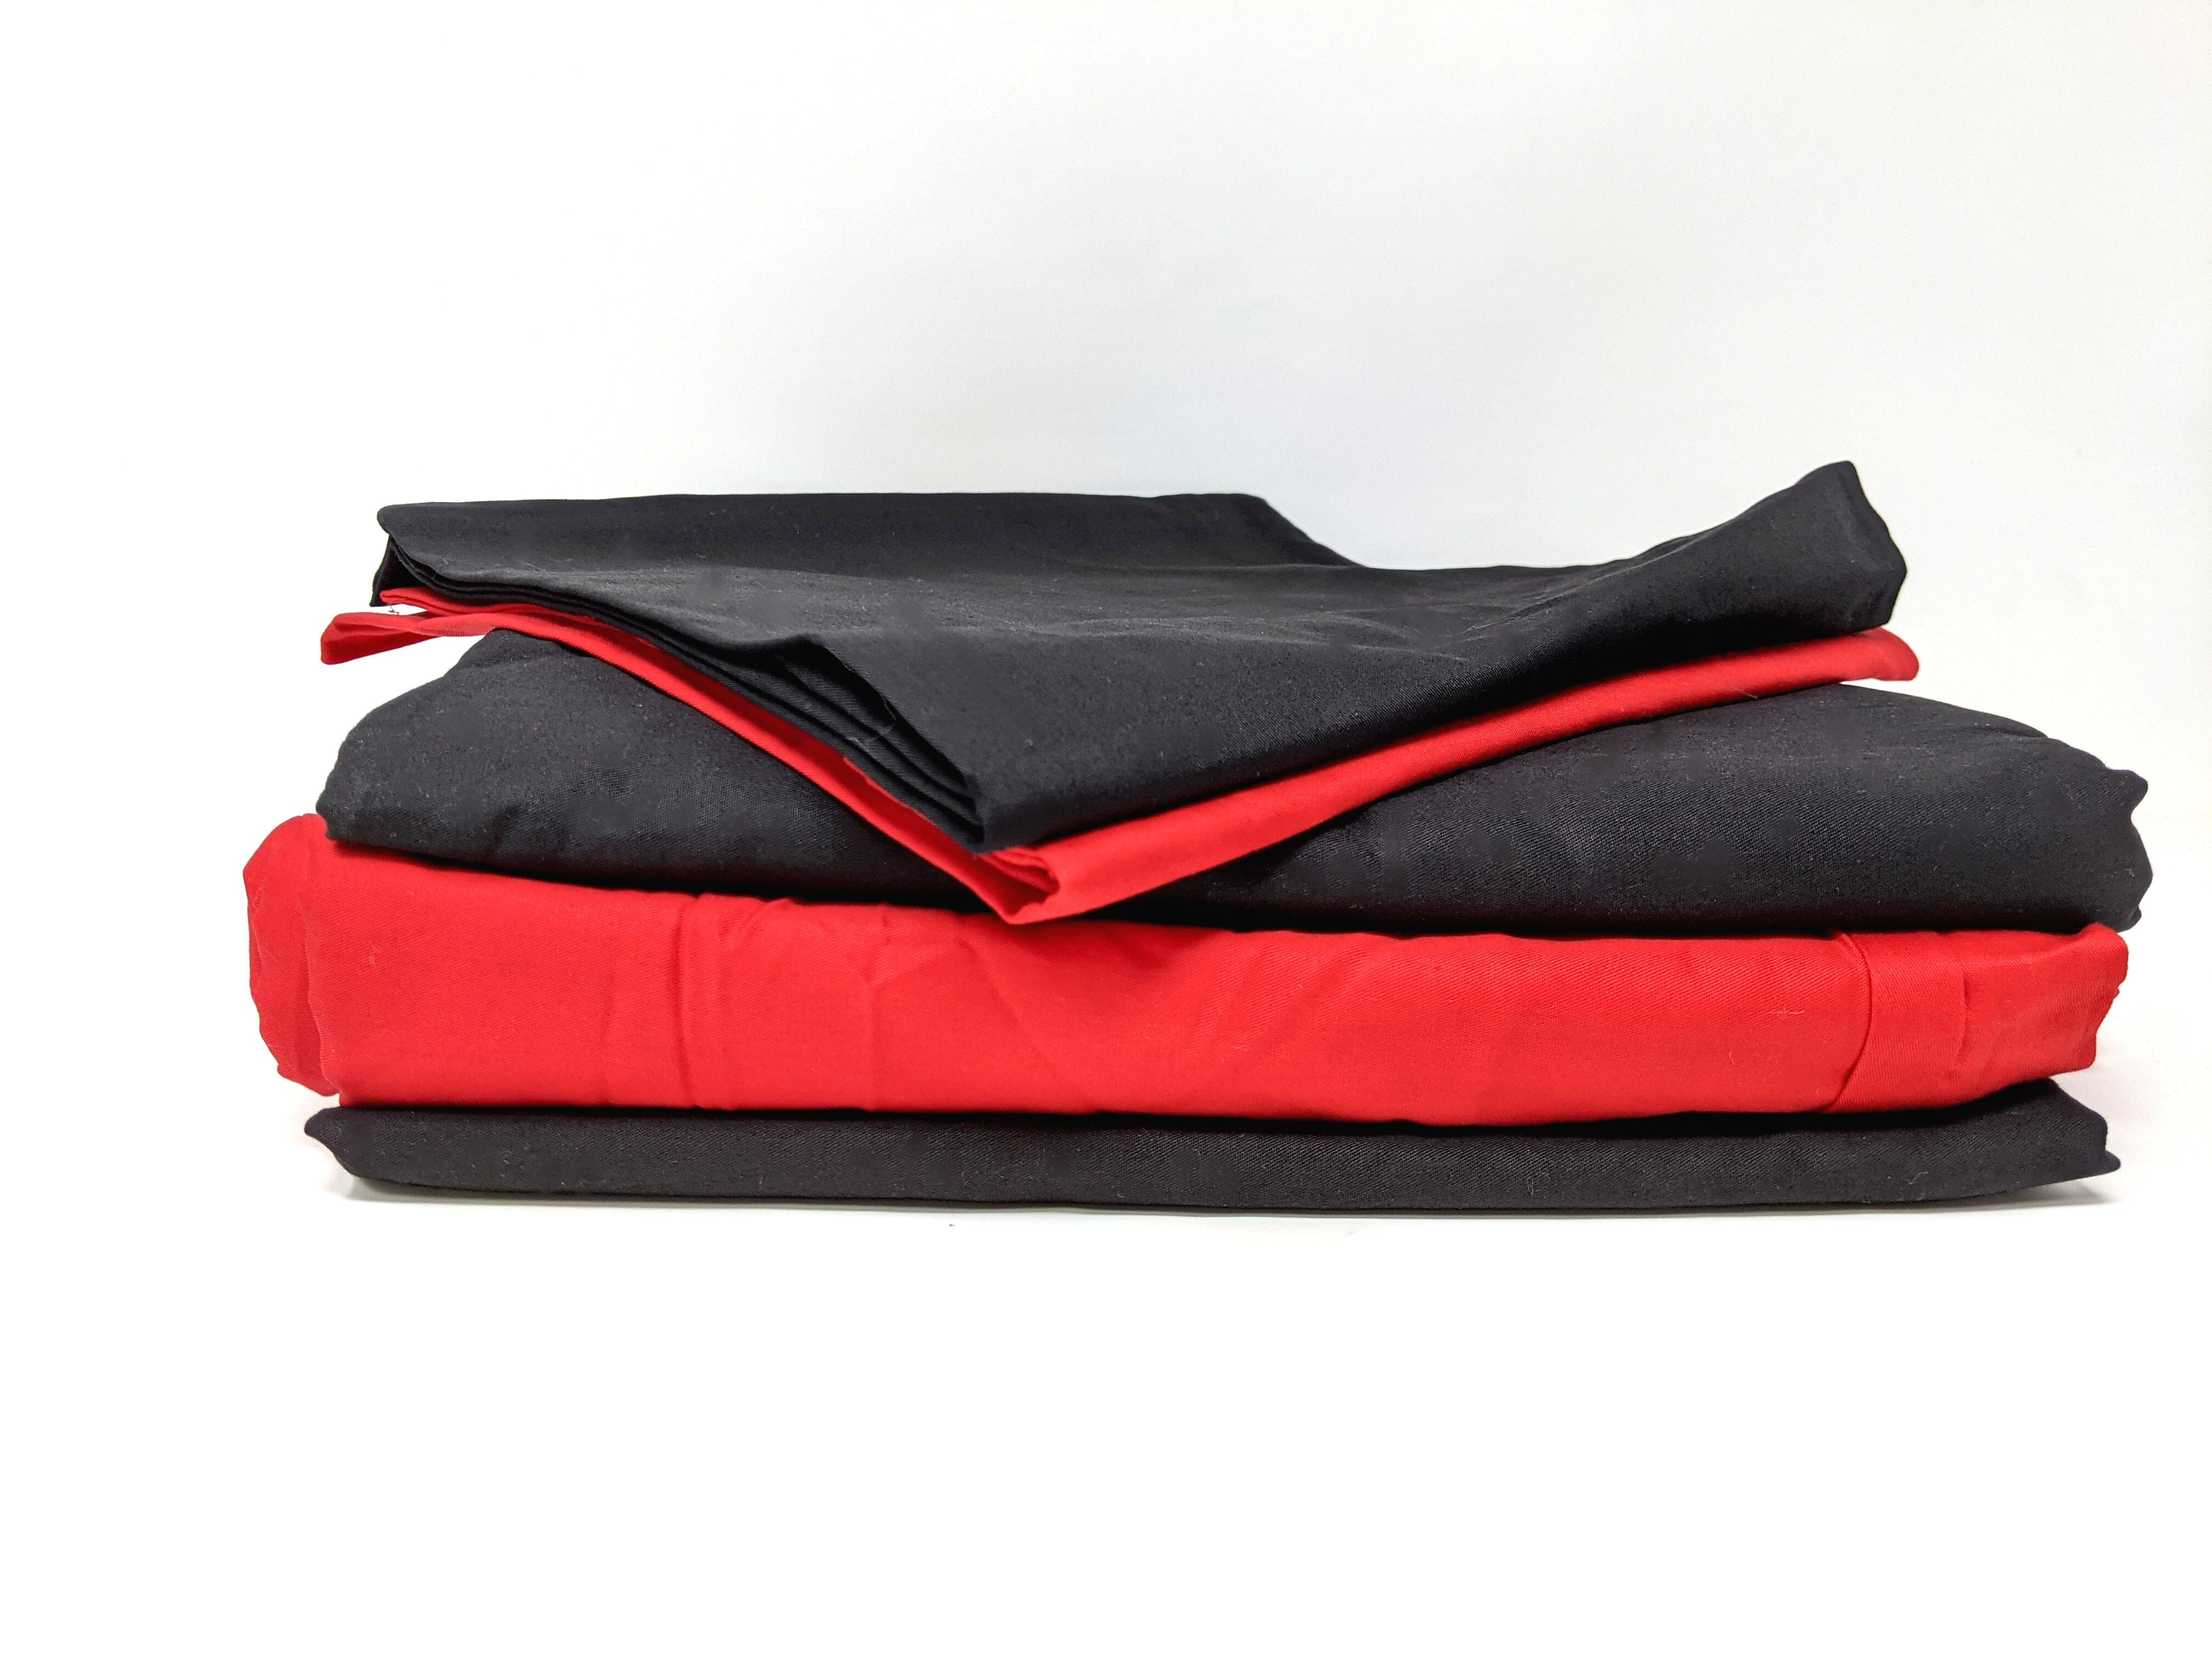 Tache Cotton Vibrant Red and Black Bed sheet set (BS4PC-BR) - Tache Home Fashion